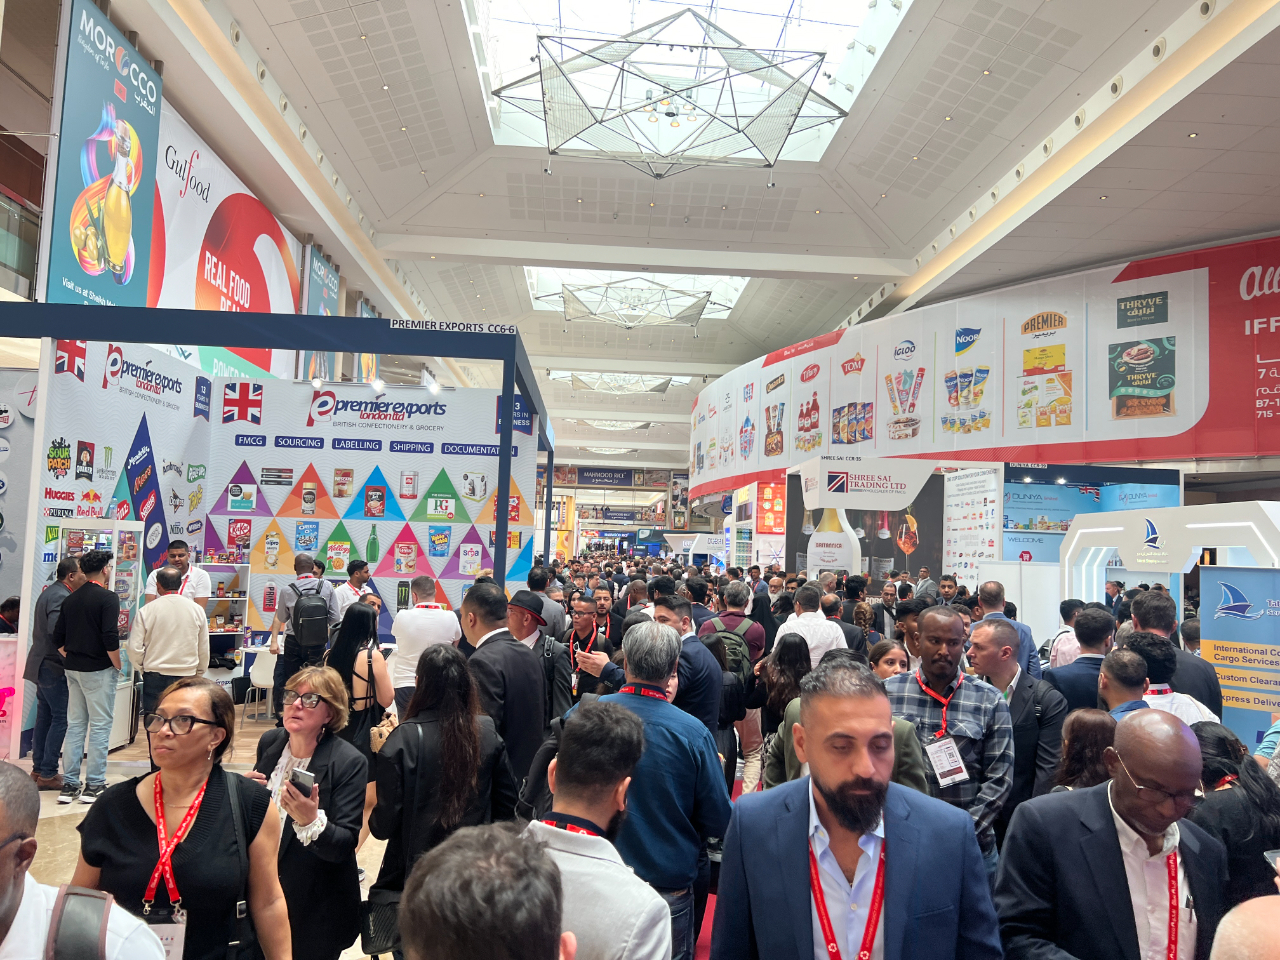 The crowd at Gulfood 2024 venue is numerous.